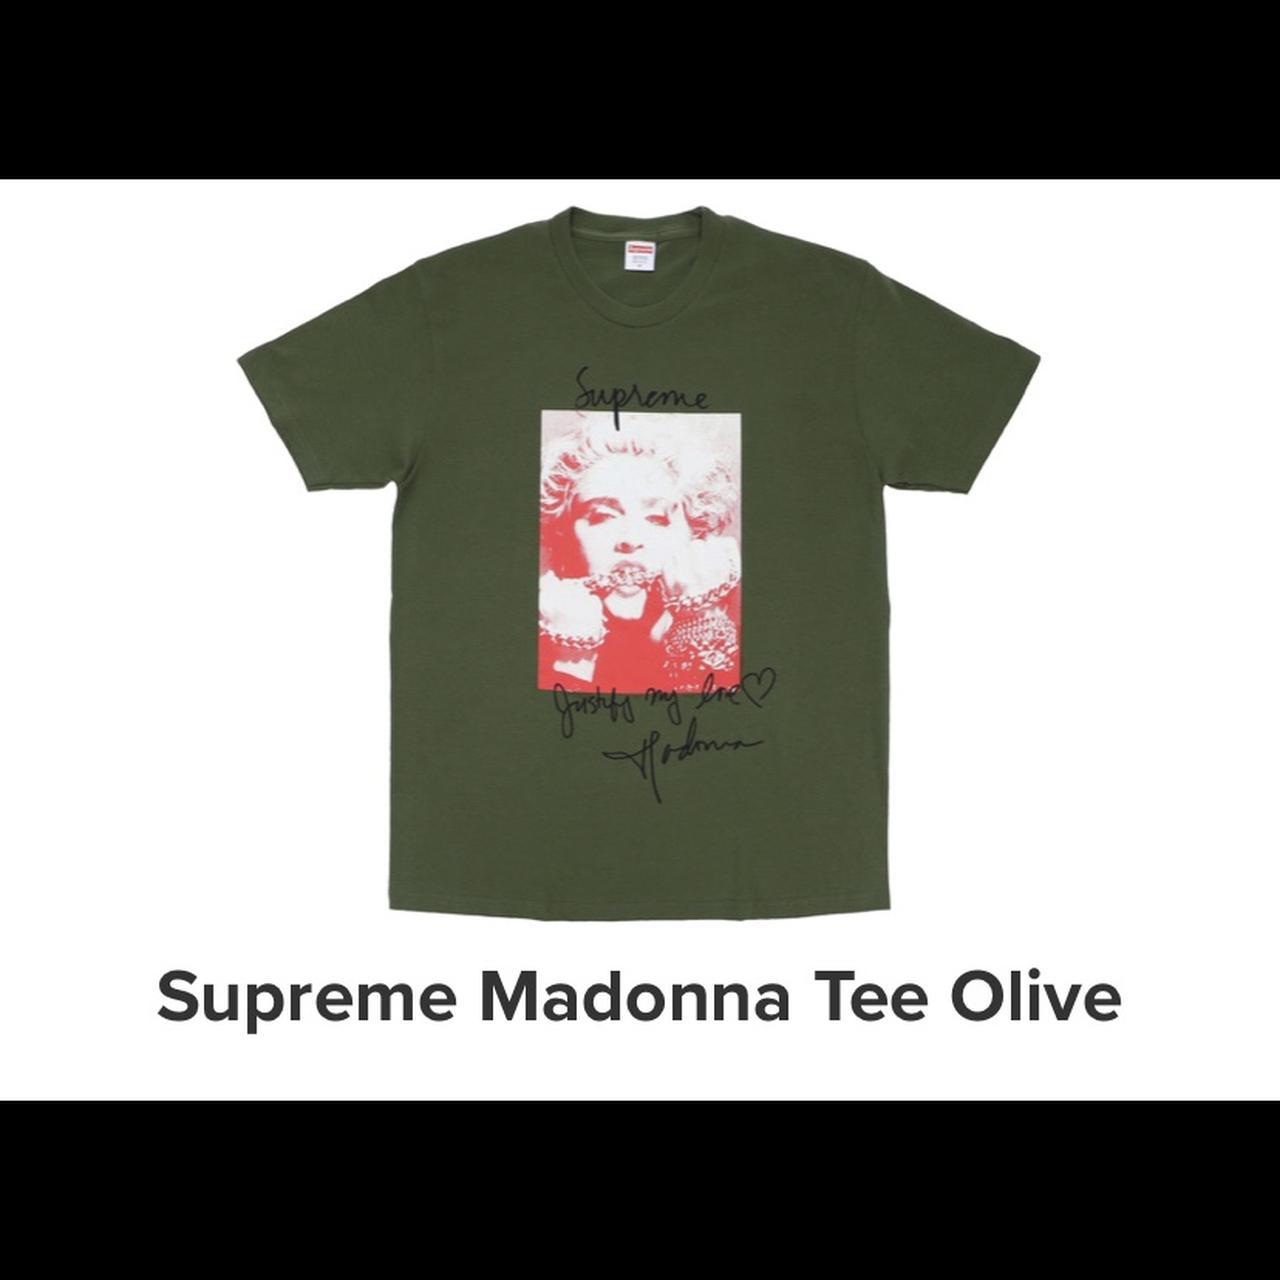 DS Supreme x Madonna Olive Tee , F/W 18 , Authentic...